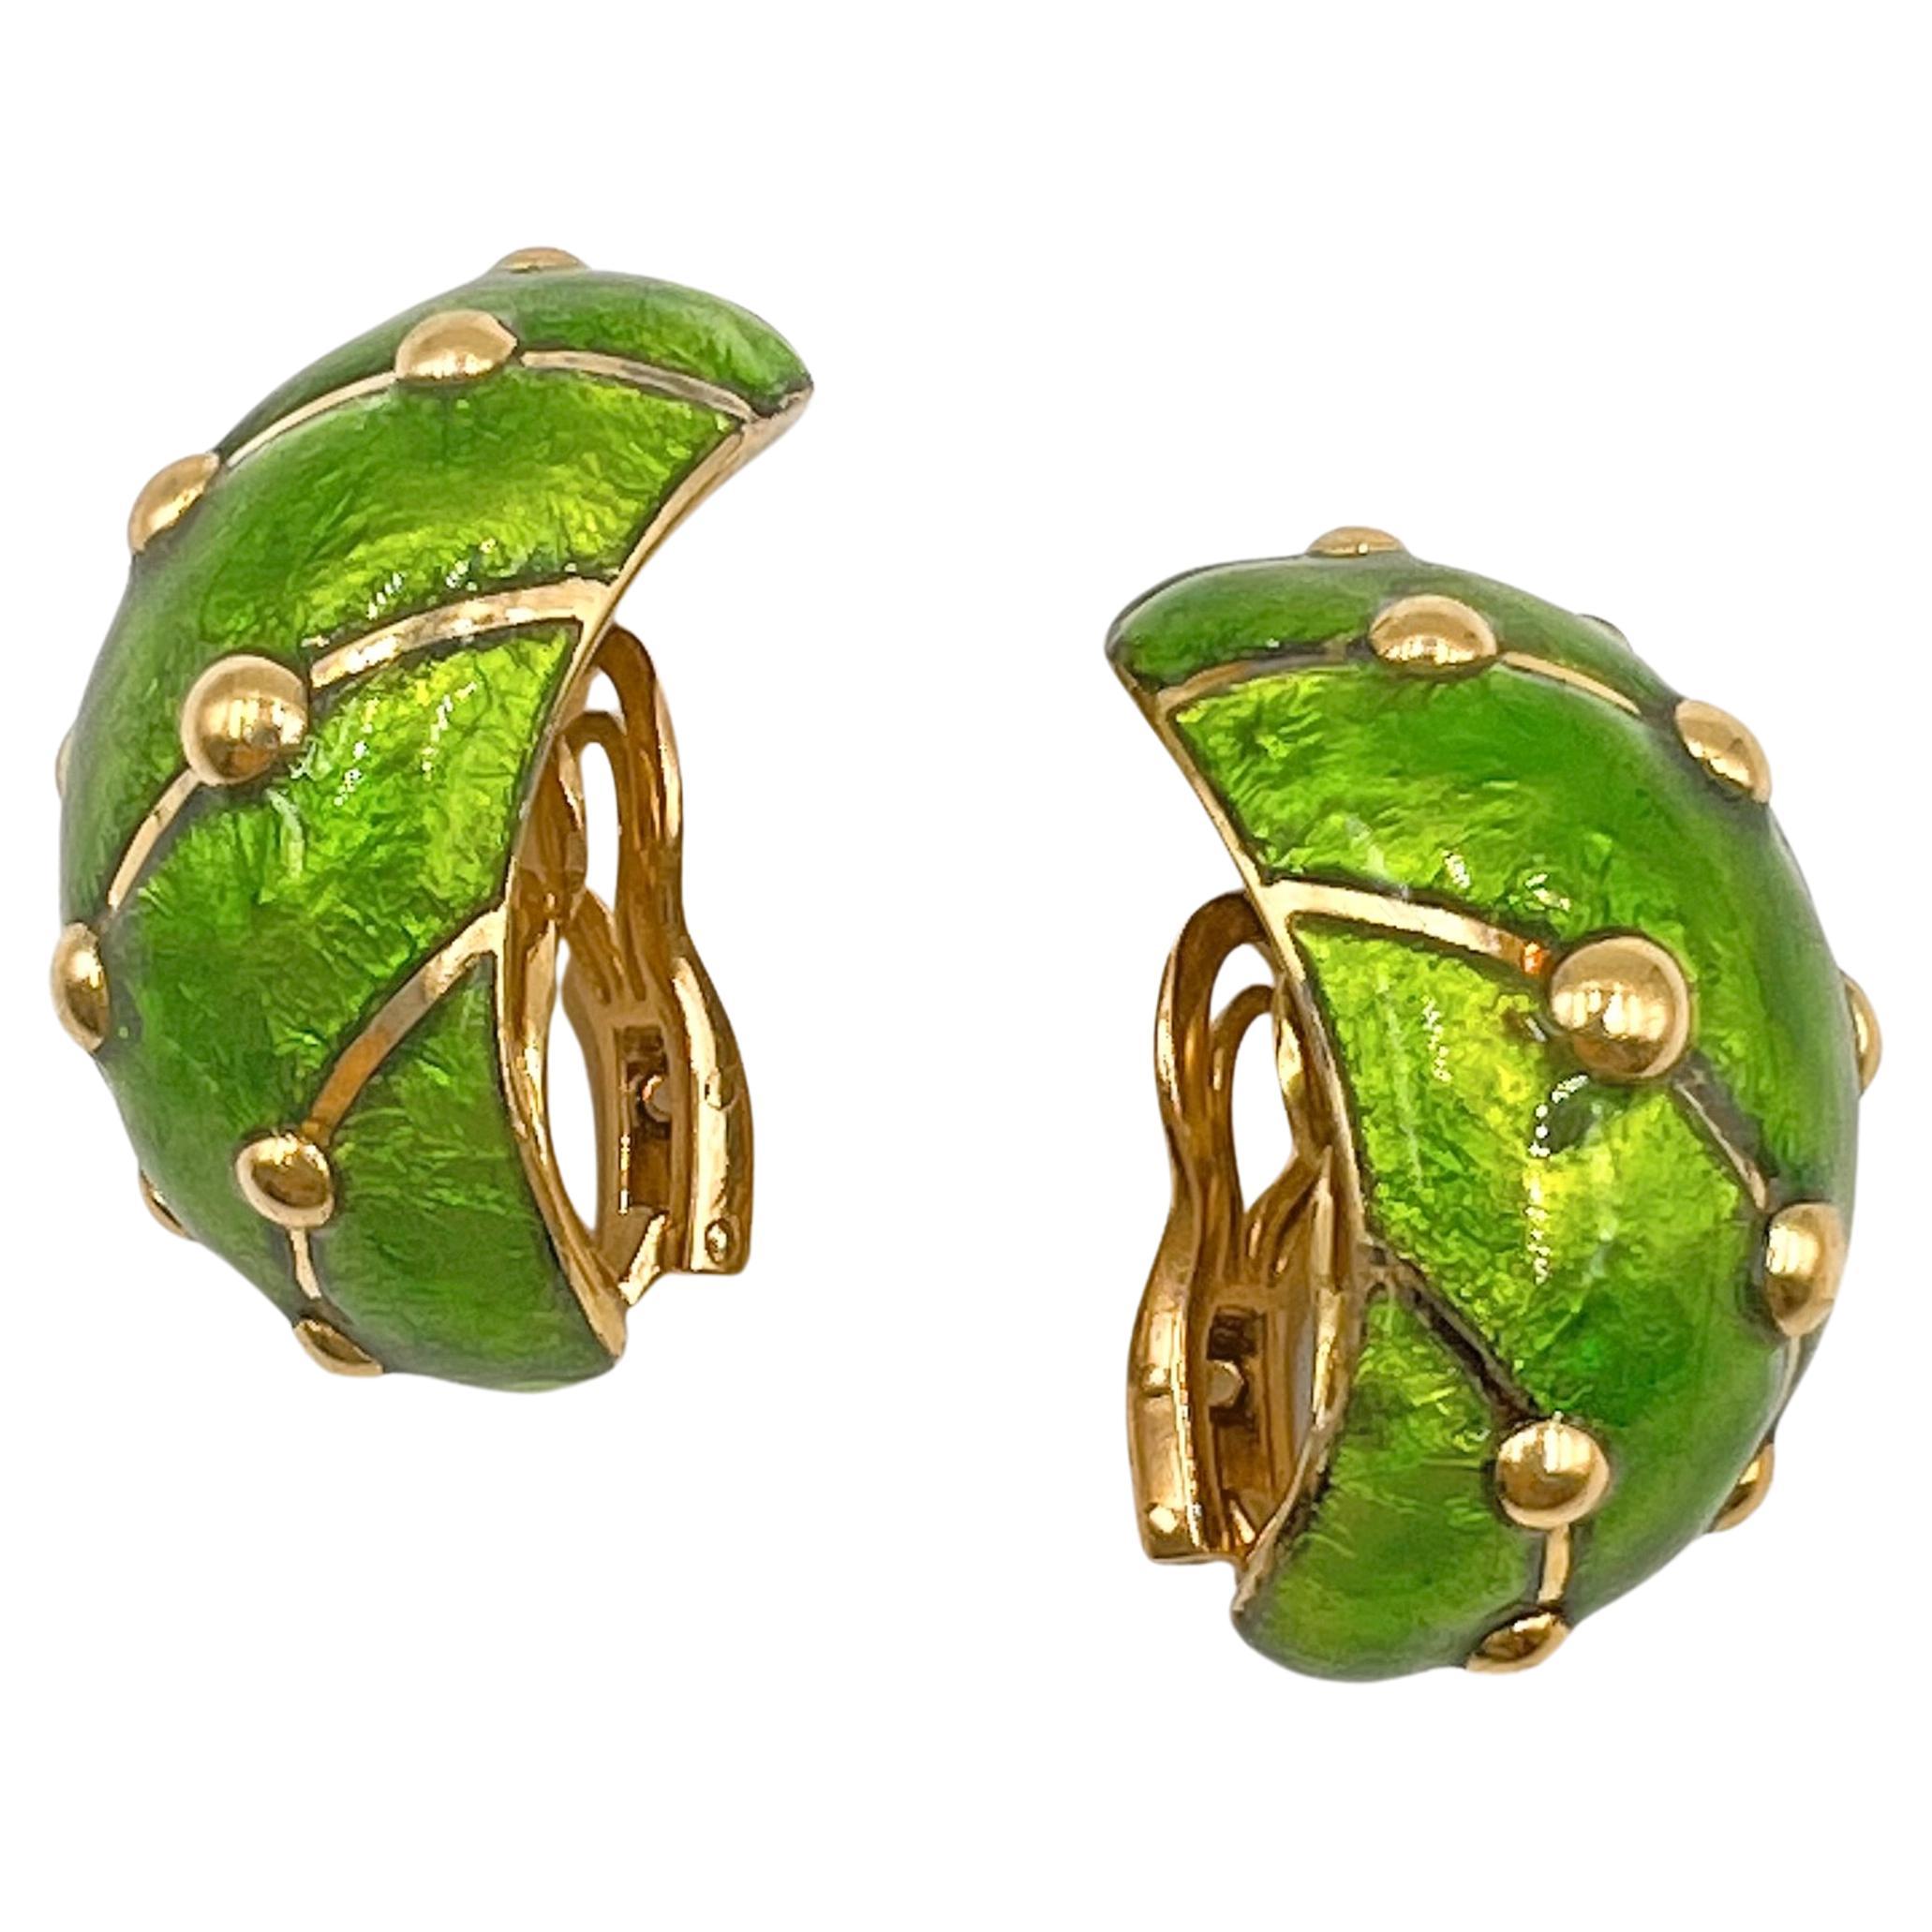 Half-hoop earrings, crafted in bright green enamel offset by raised diagonal gold stripes with domed gold bead accents, in polished 18k yellow gold.  Clip backs.  Signed 'SCHLUMBERGER PARIS'.  1.10